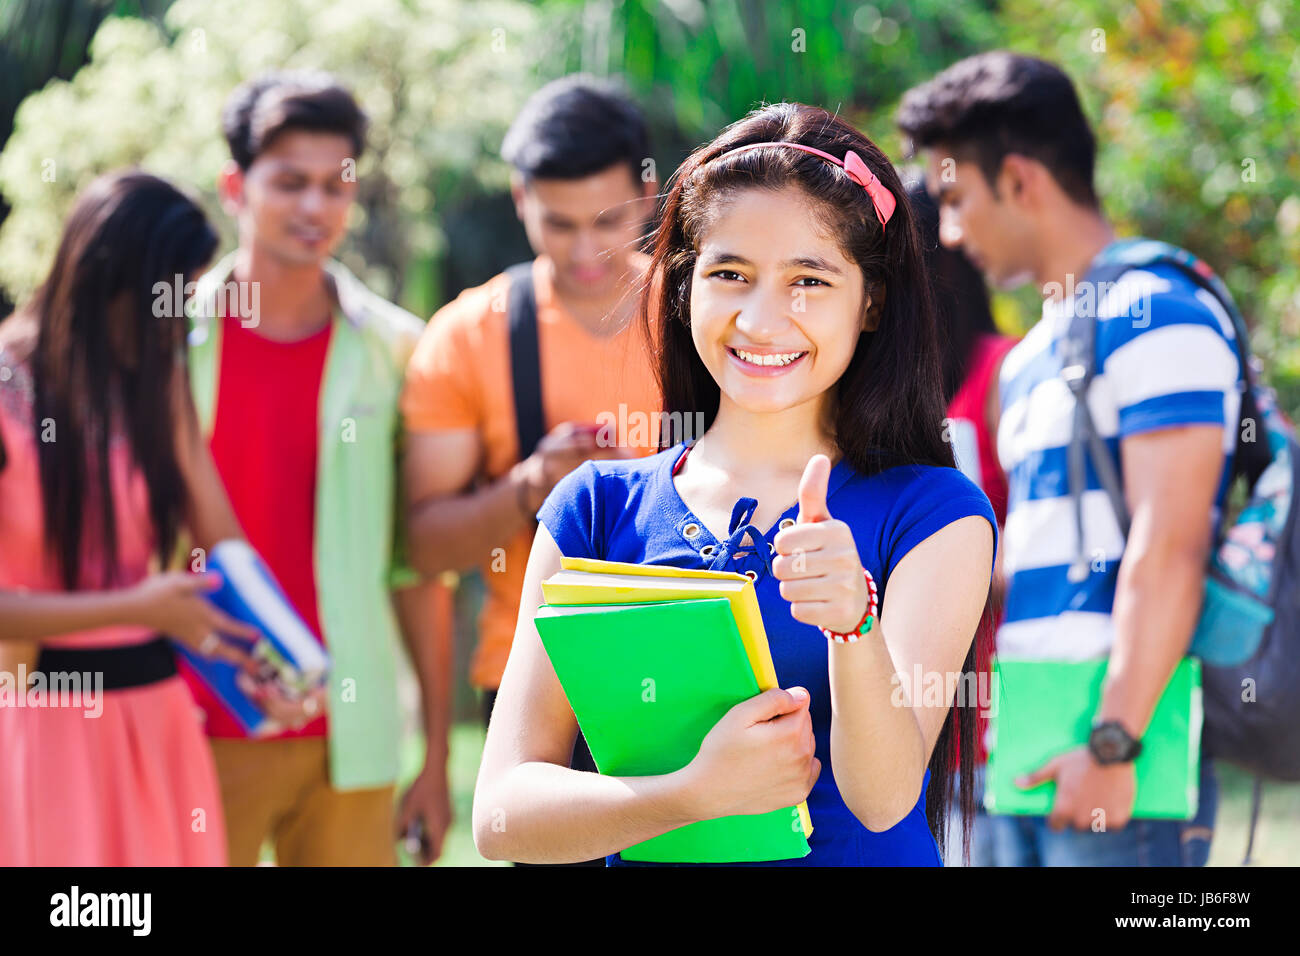 1 Indian College Girl Student Standing In Park Showing Thumsb up Stock Photo